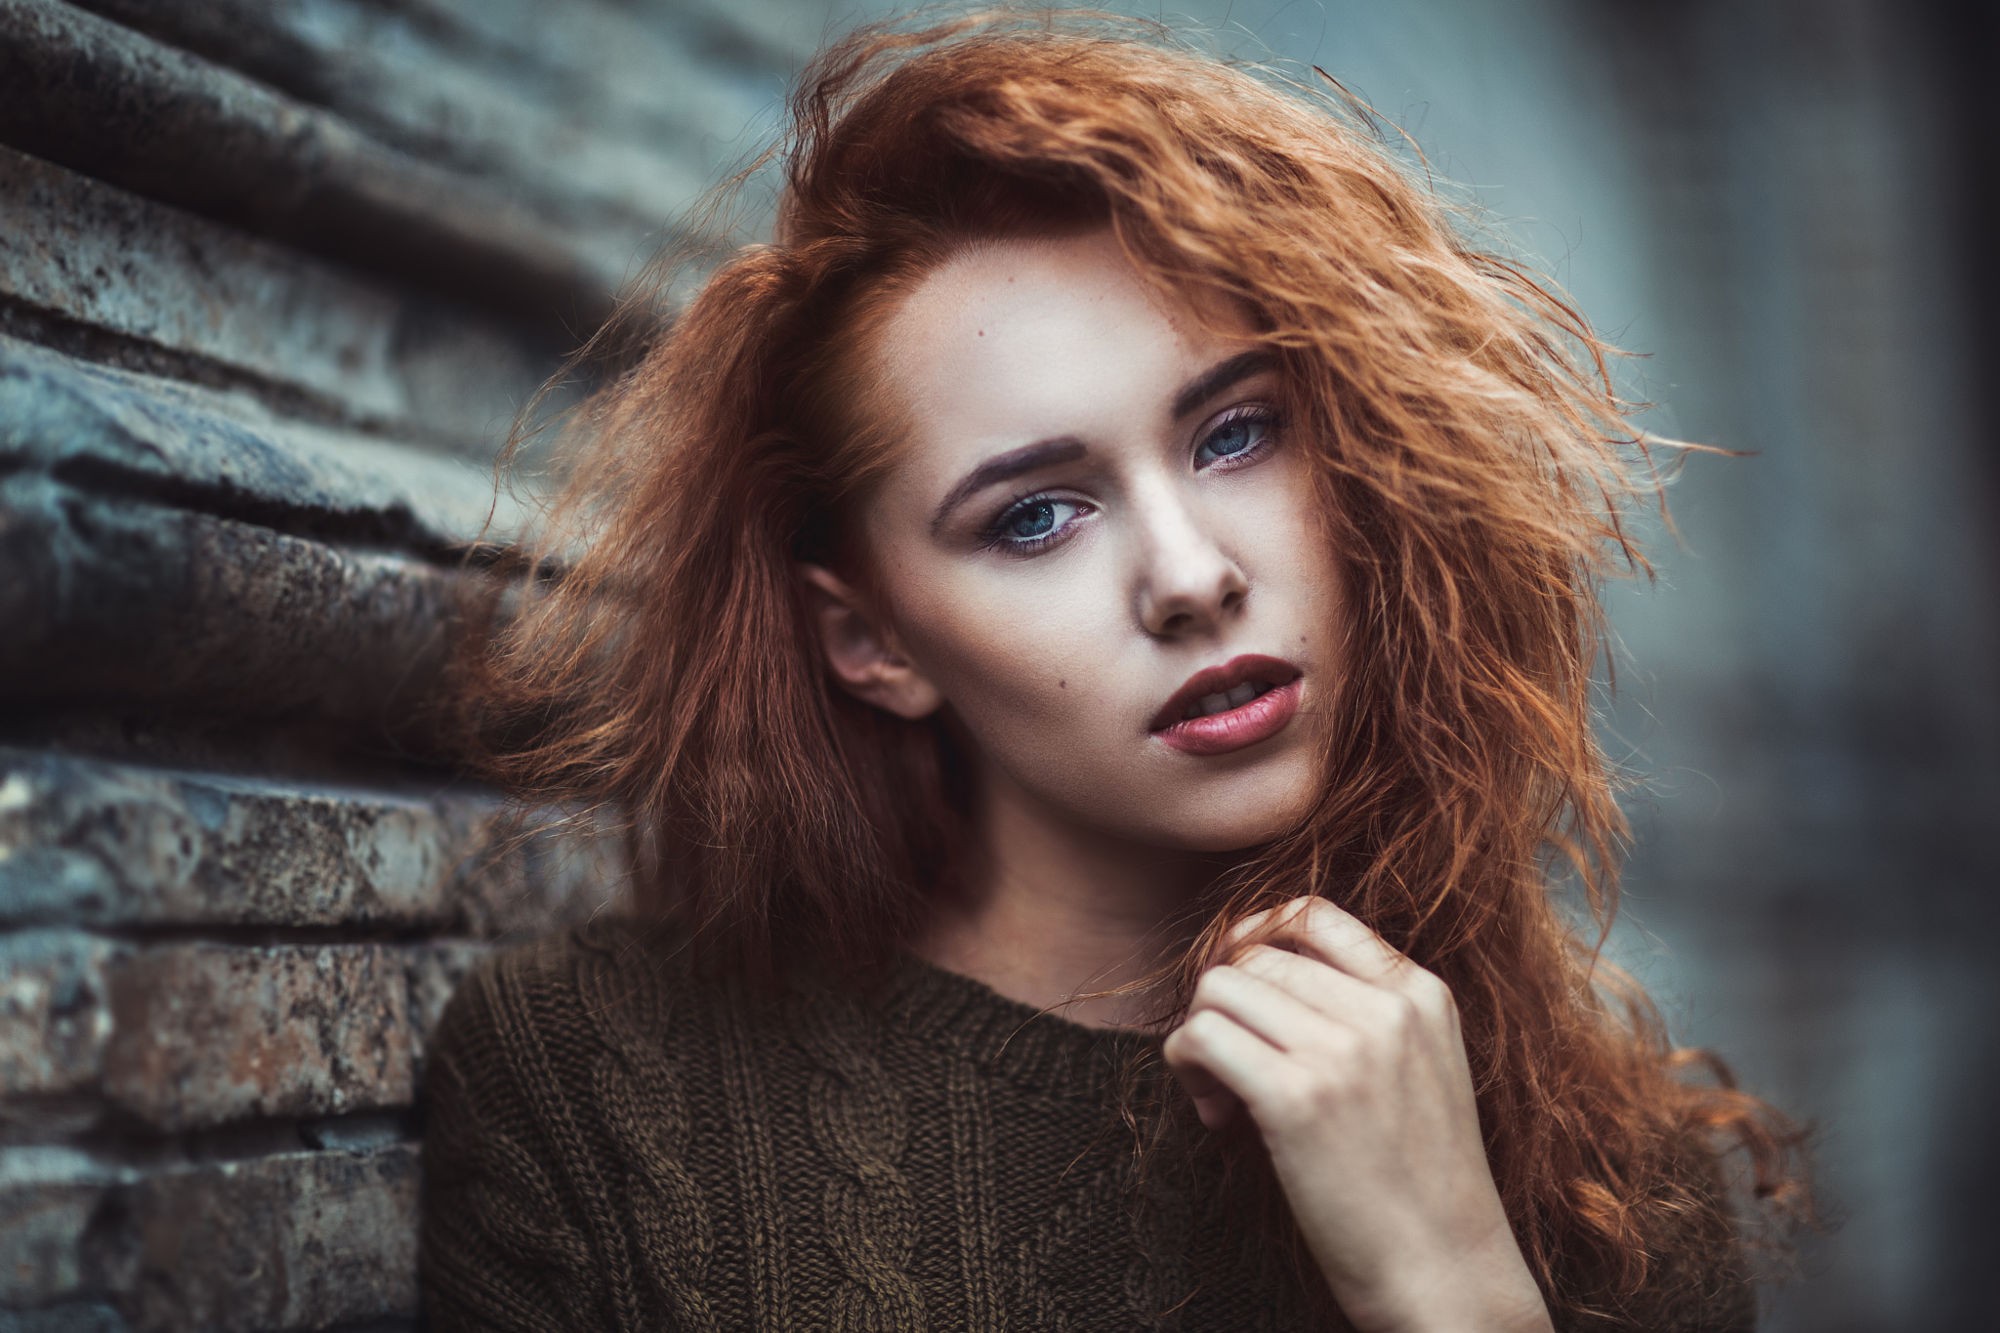 People 2000x1333 redhead women curly hair fingers wall sweater face portrait looking at viewer women outdoors urban brown sweater makeup blue eyes model closeup by the wall